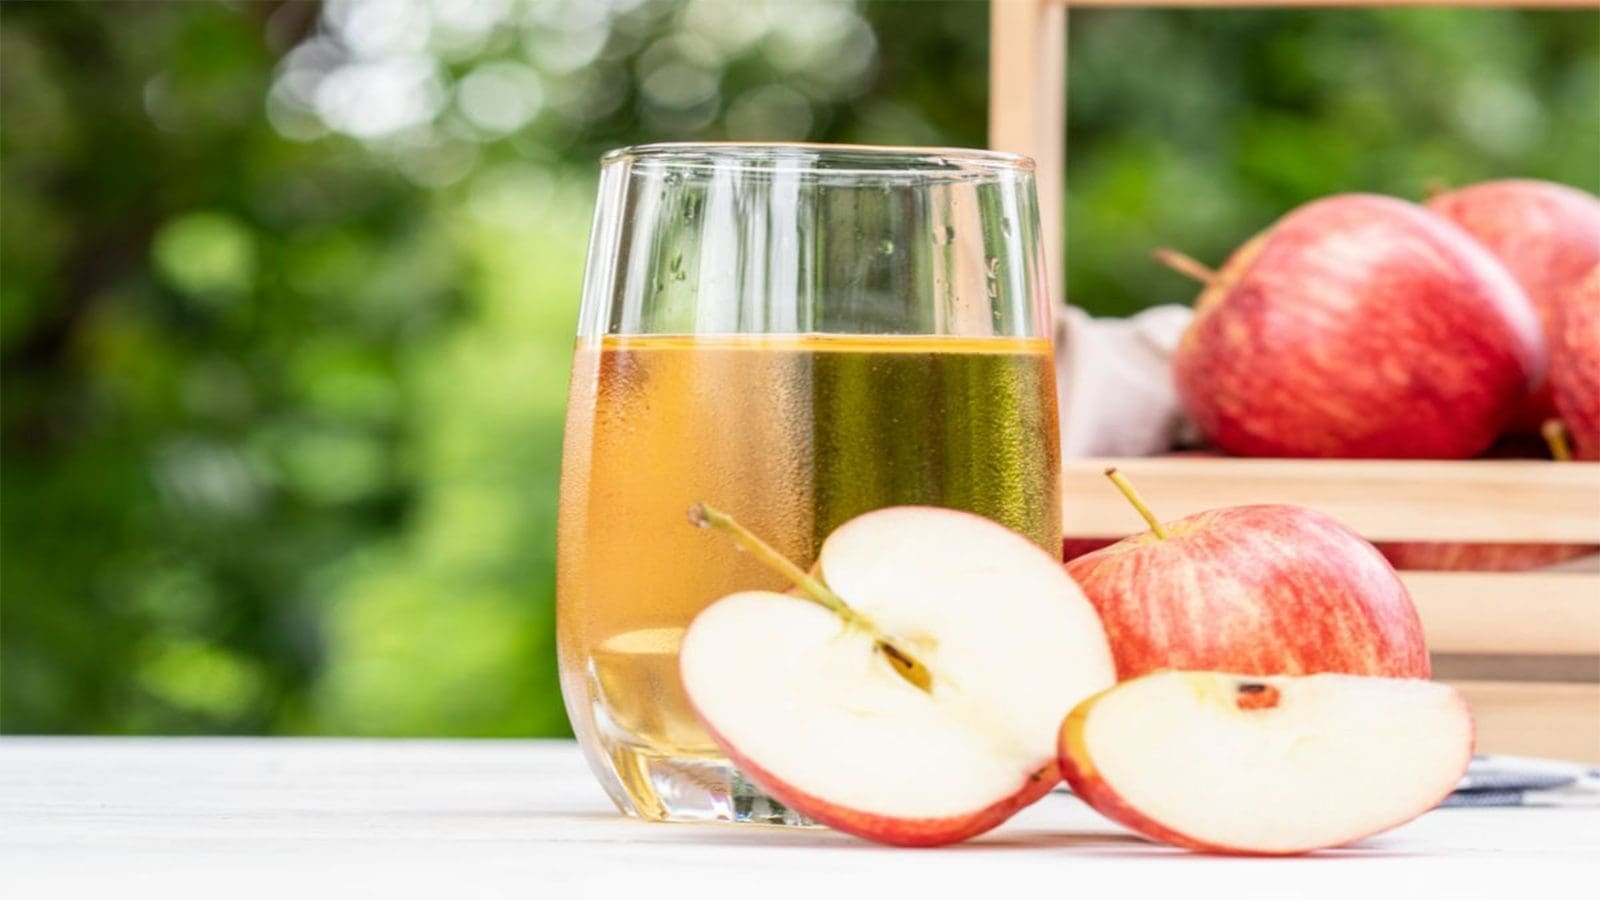 FDA sets action level for inorganic arsenic in apple juice to ensure safety